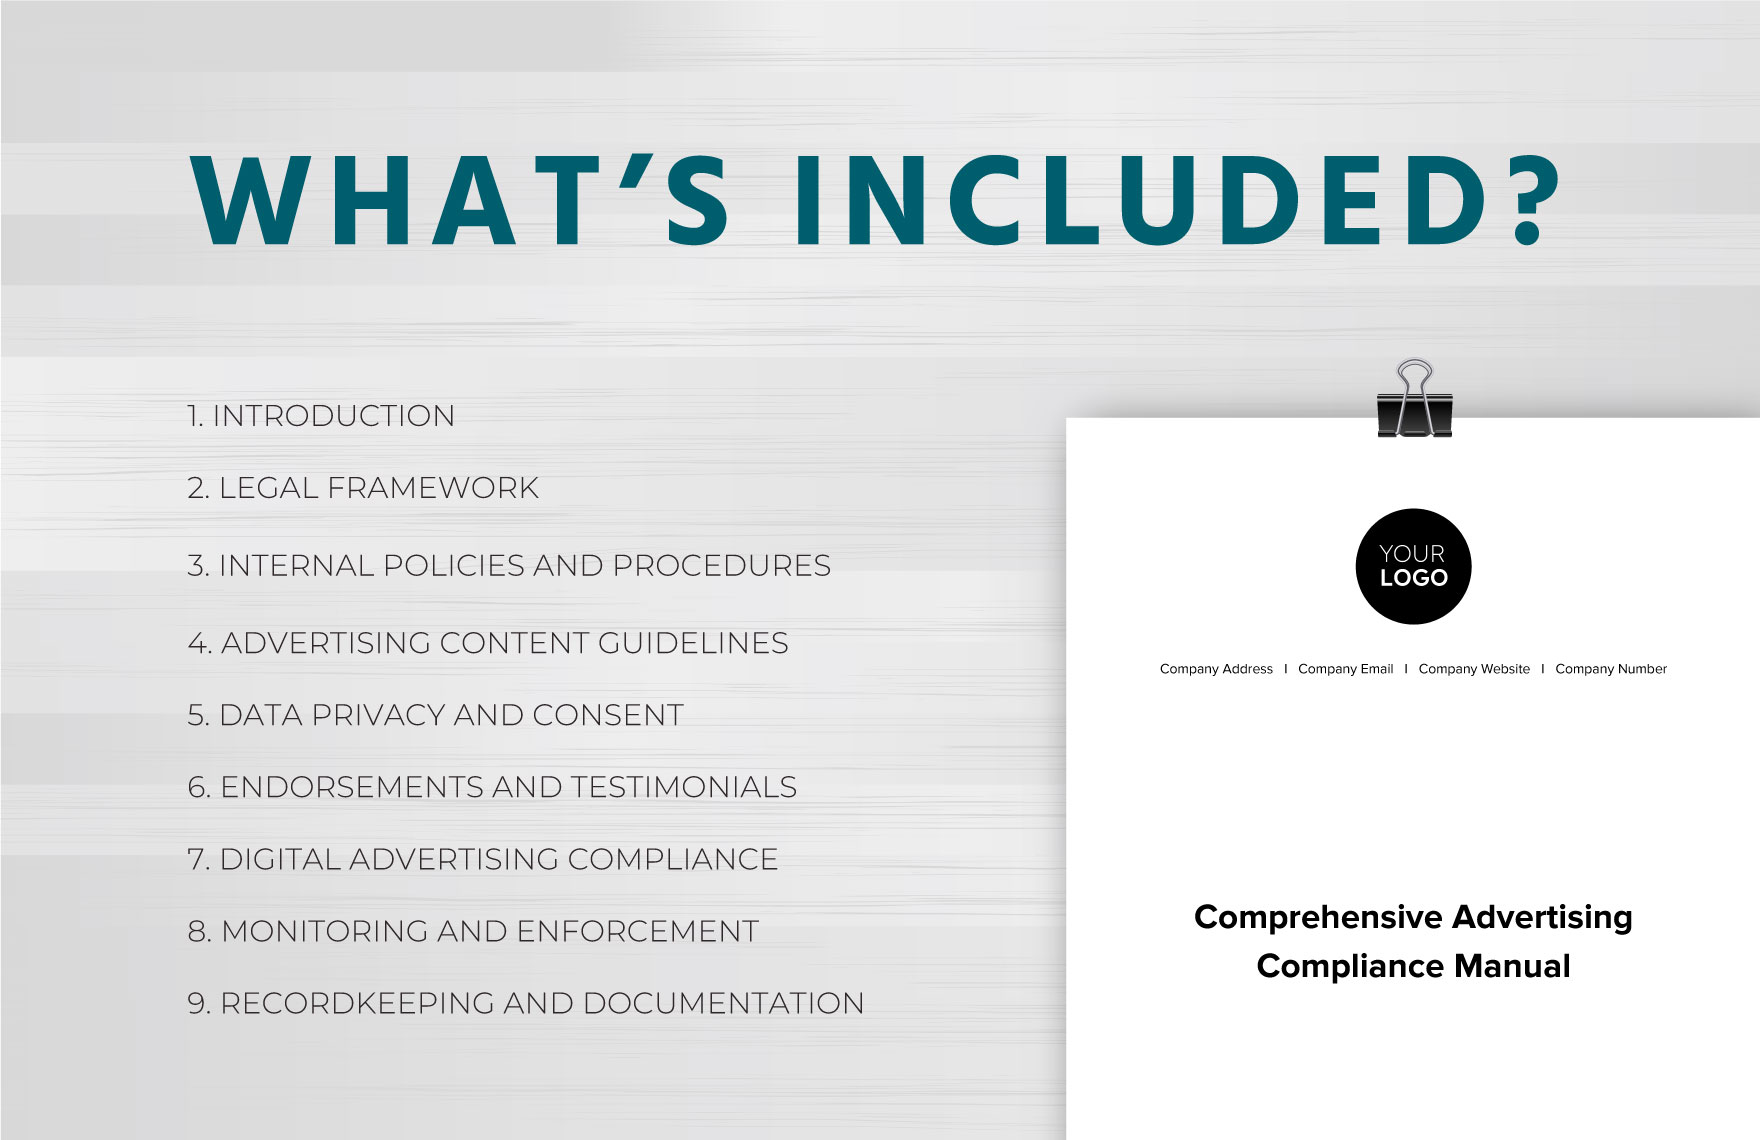 Comprehensive Advertising Compliance Manual Template